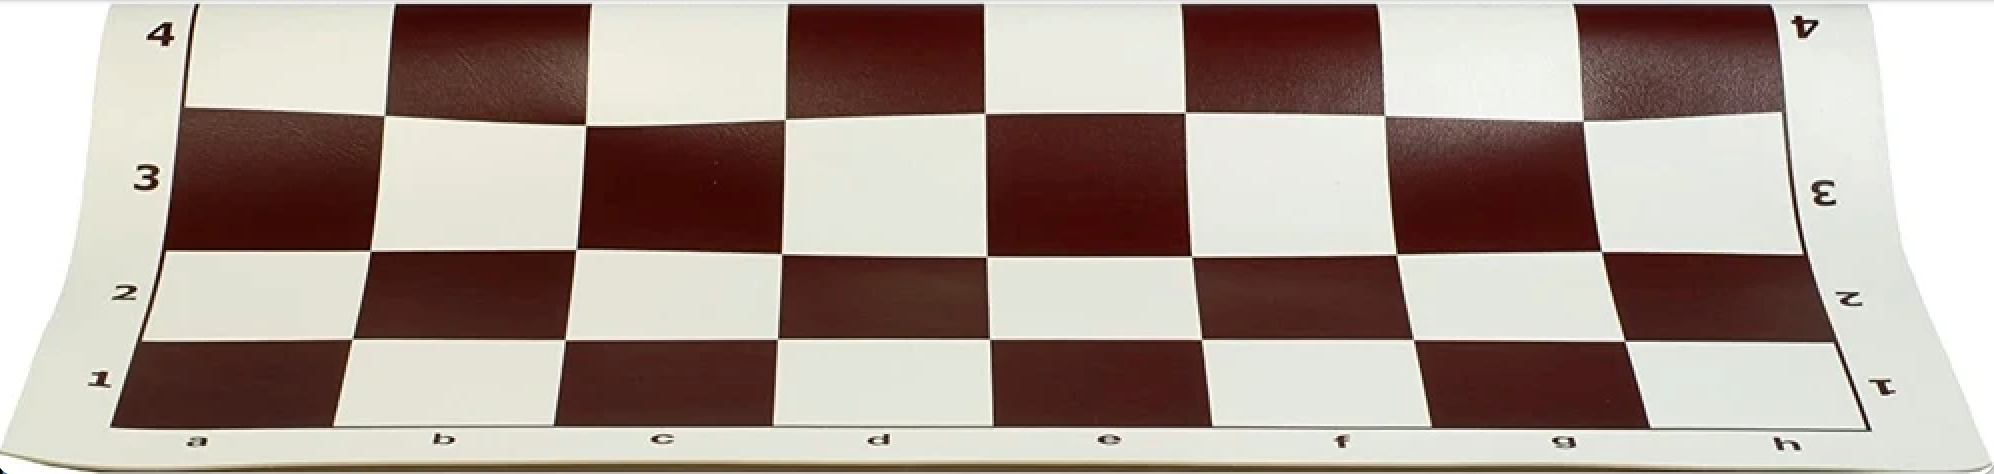 Chessboard - Vinyl with Brown Squares